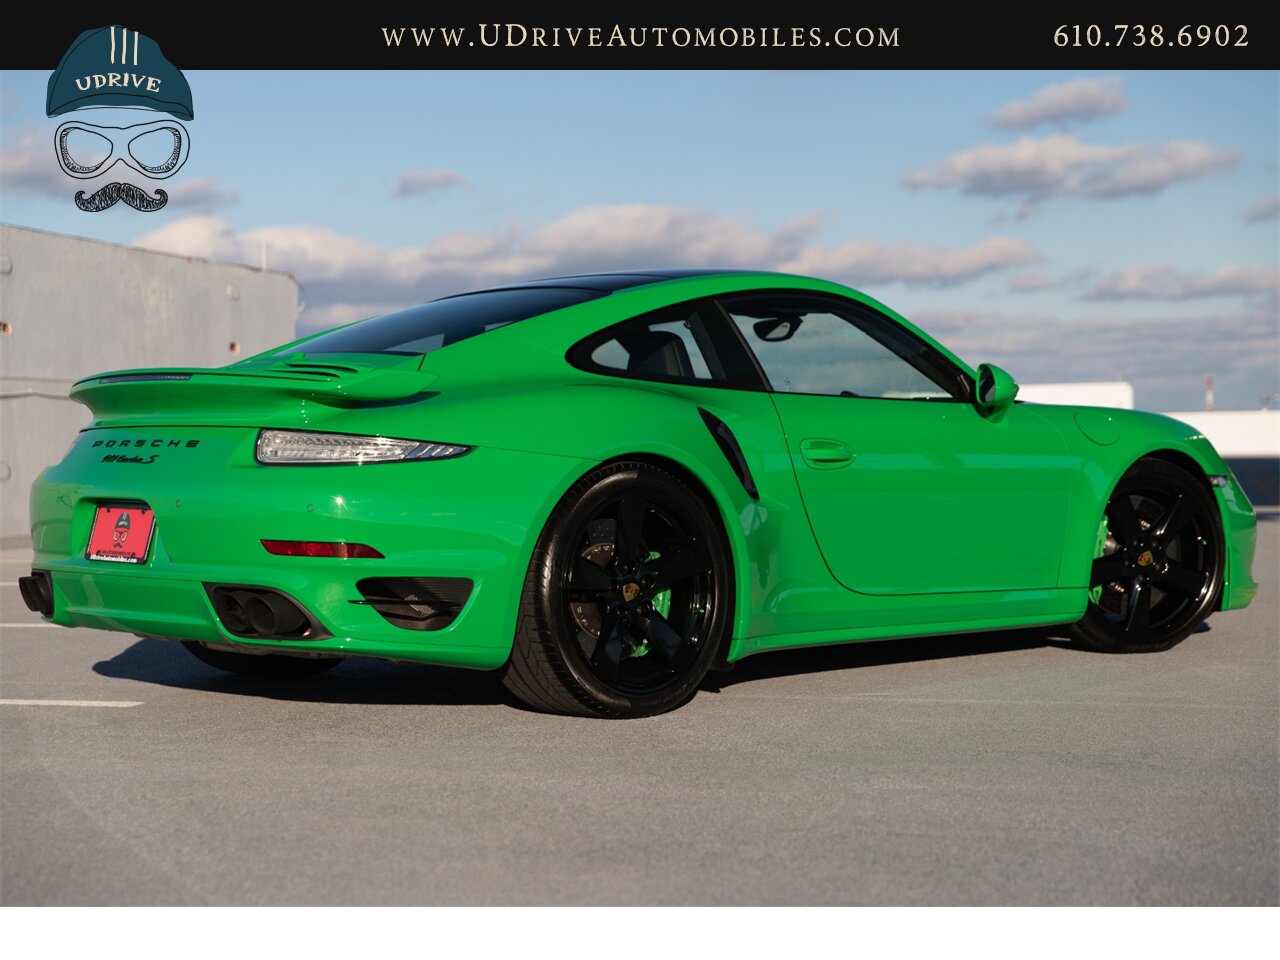 2016 Porsche 911 Turbo S PTS Viper Green Aerokit $203k MSRP  Painted Side Skirts Painted Grilles Wheels in Black - Photo 3 - West Chester, PA 19382